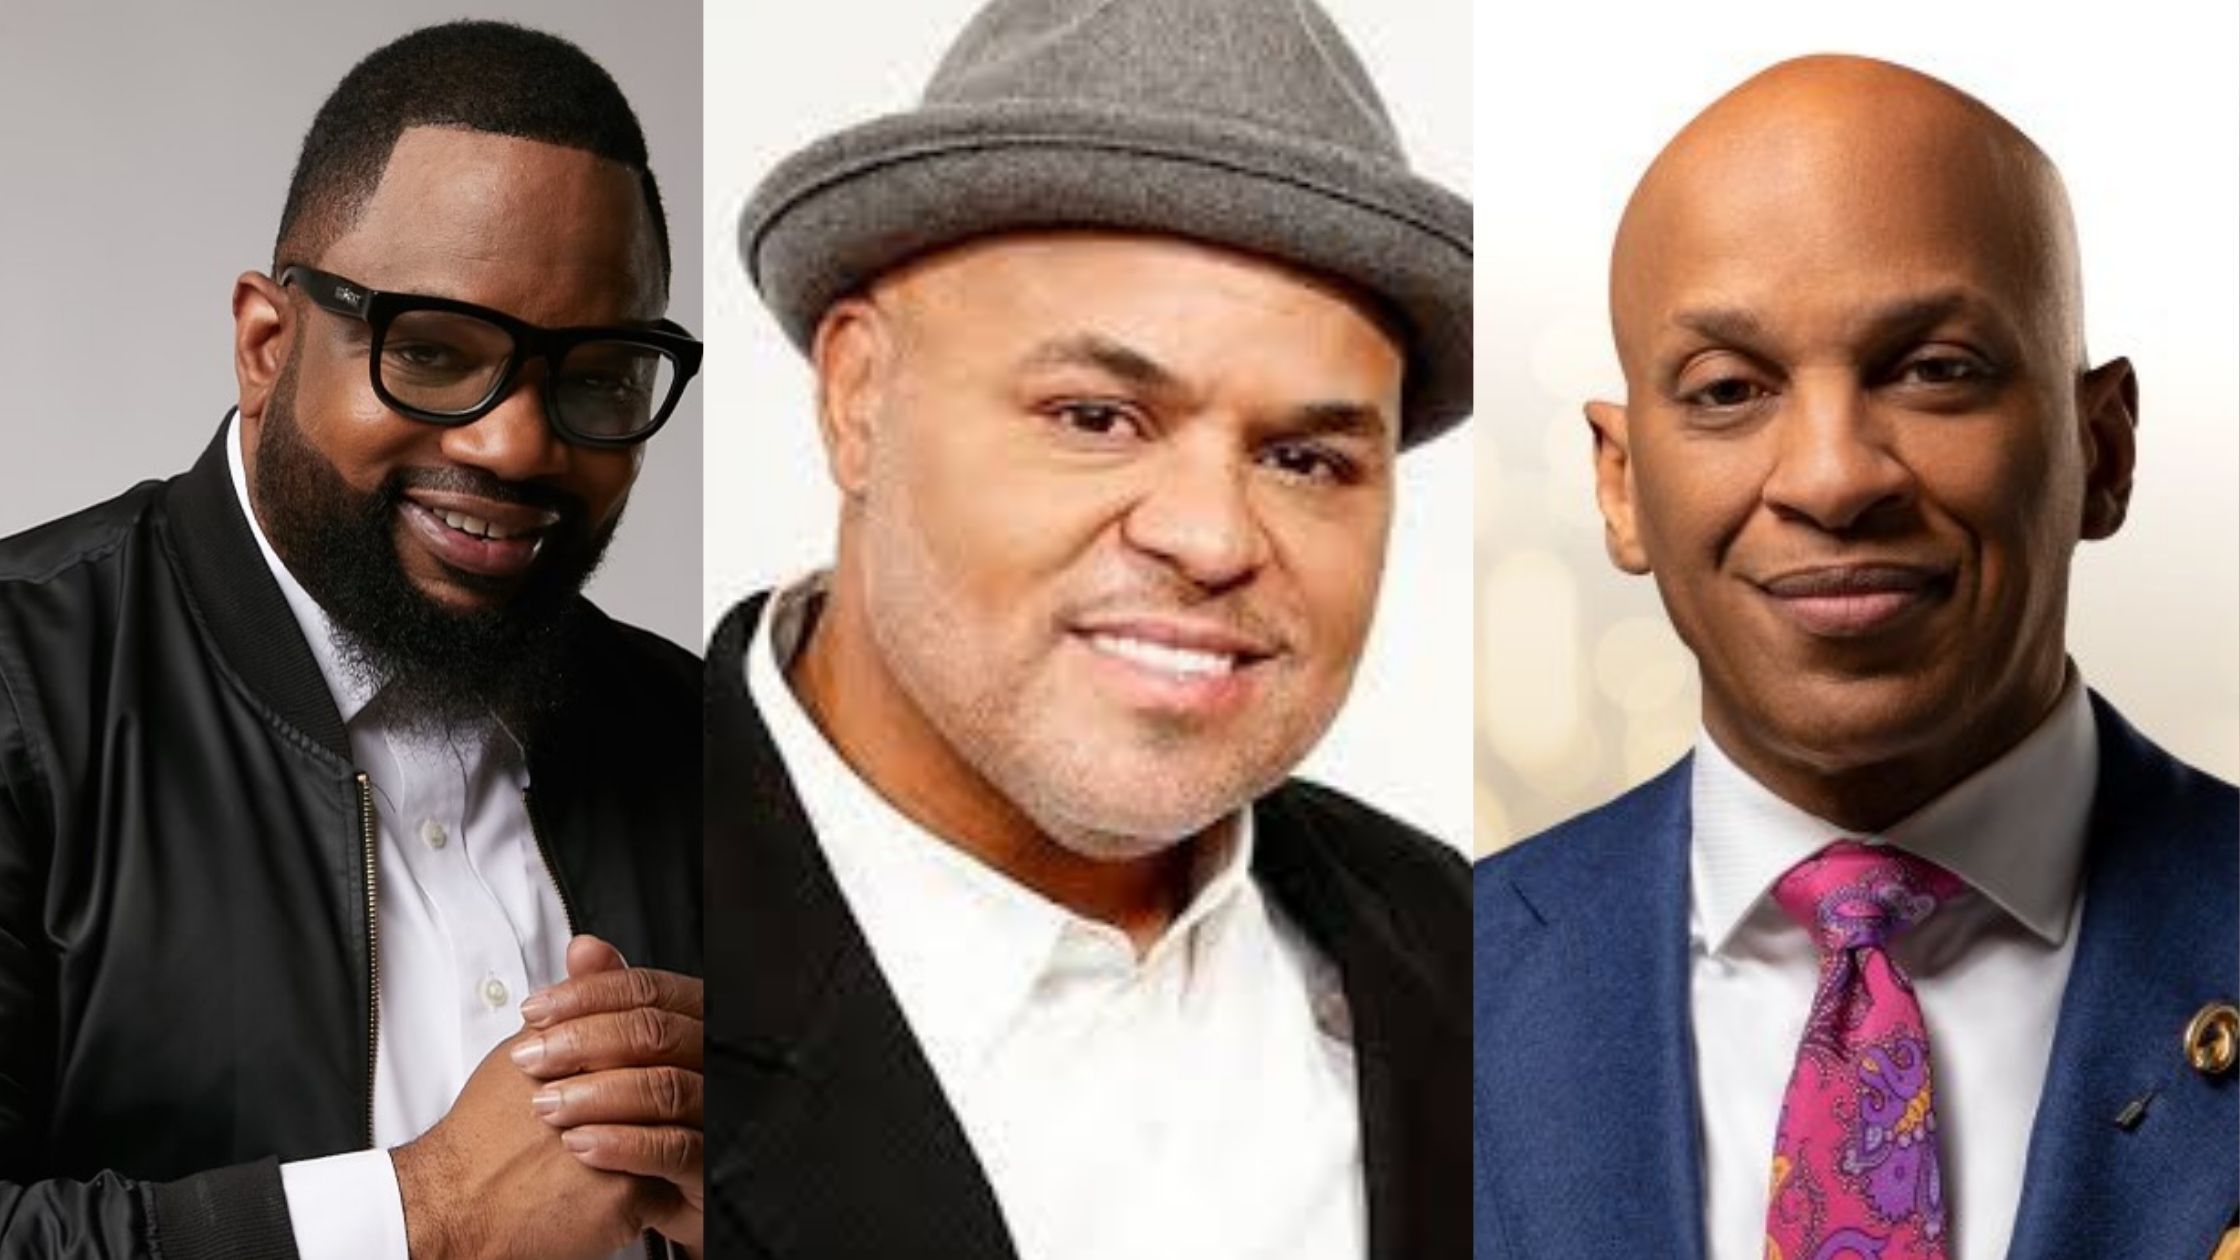 Hezekiah Walker, Donnie McClurkin, and Israel Houghton deliver songs of praise and encouragement to the families of the Buffalo, NY victims